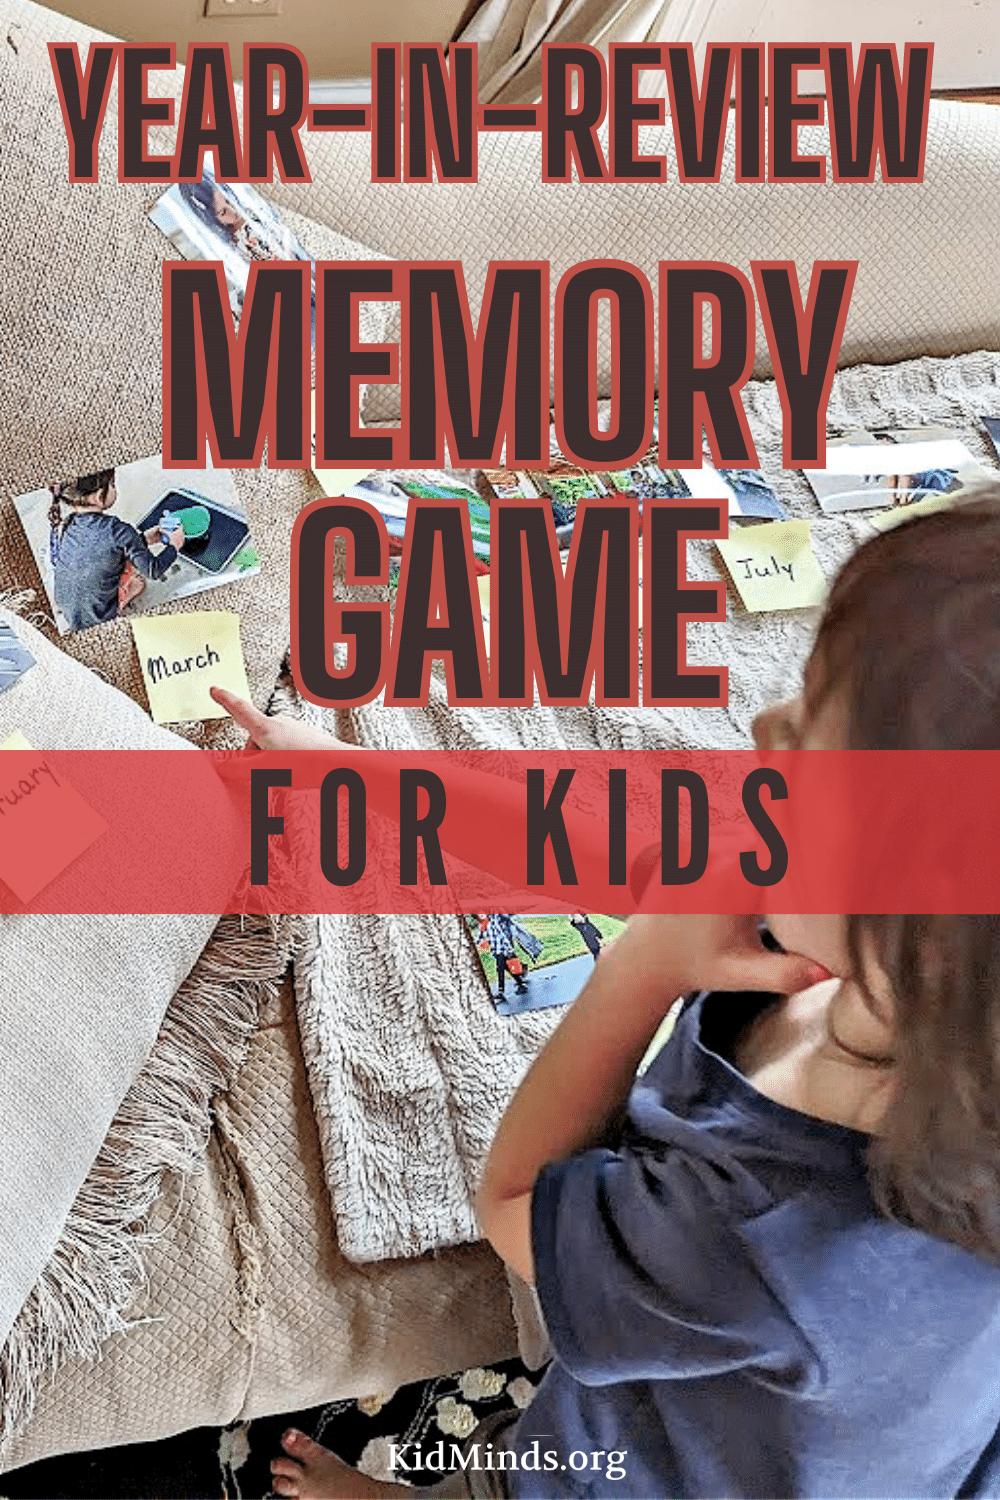 Use these simple memory games with your children to help them build their memory muscles and improve their thinking skills. #memorygames #memorygamesforkids #memorygame #braingames #memory #education #bestgamesforhomeschooling #earlyeducation #kidminds #childdevelopment